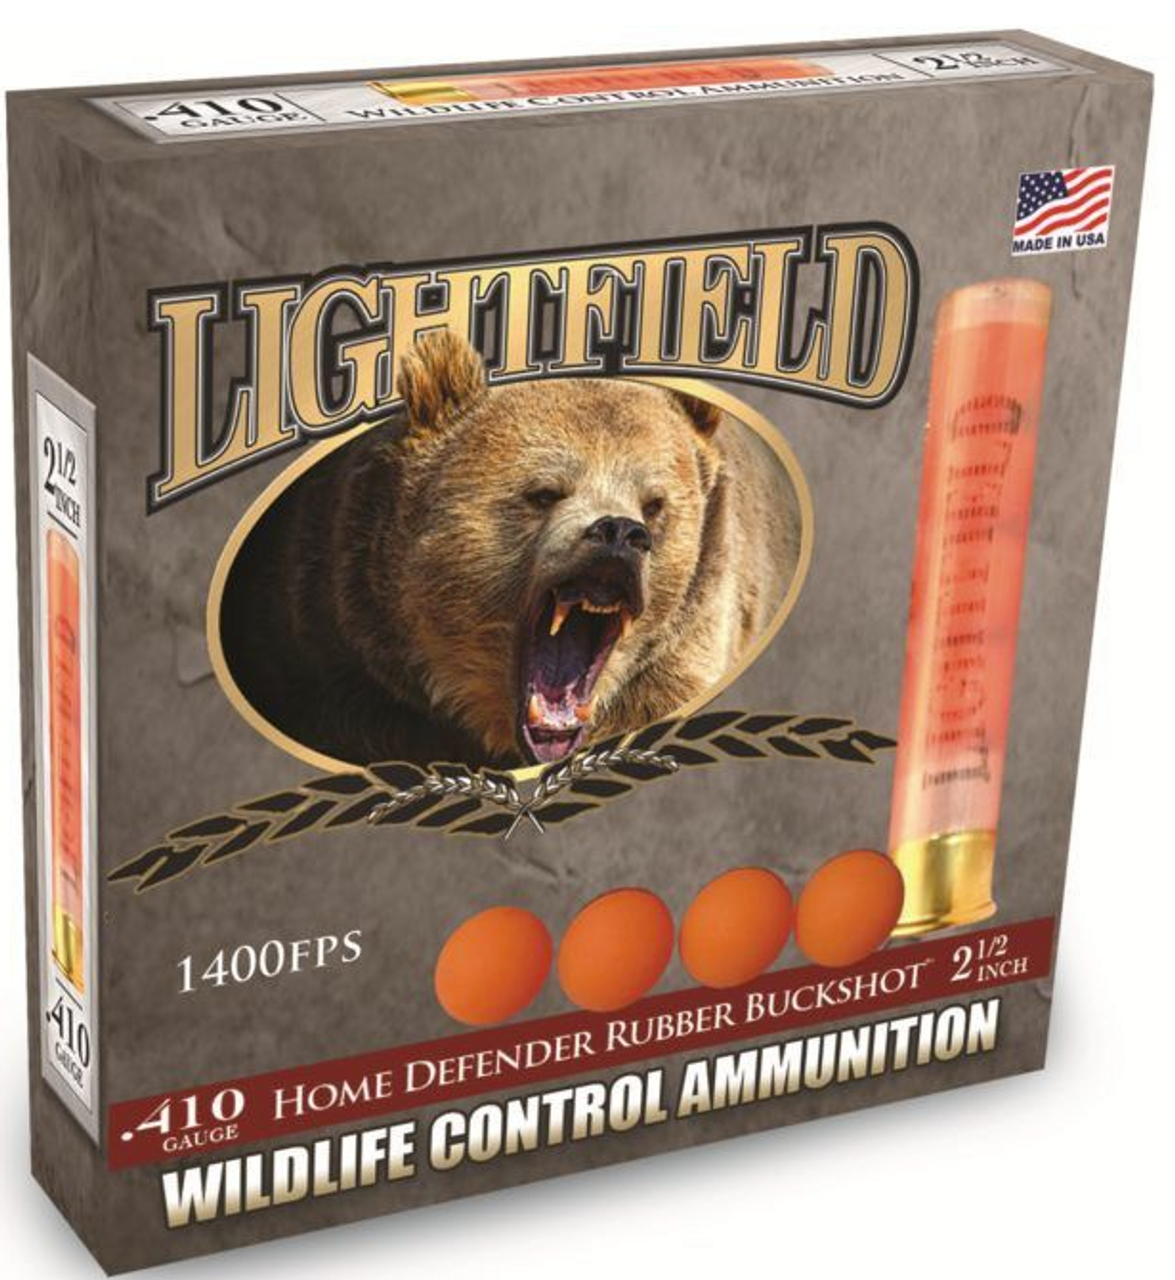 Lightfield Rubber Buckshot

Lightfield is the premier manufacturer of shotgun ammunition. While perfecting the sabot slug in the 1970's for the US Marine Corps, they 'set the standard by which all other slugs are judged'. Innovative designs and cutting edge engineering with both lethal and 'less than lethal' shotgun rounds is what Lightfield is all about. Whether you need ammunition for Hunting, Law Enforcement, Pest Control or Home Defense, Lightfield has a round for you. 

From raccoons to bears, Lightfield Wildlife Control shotshells will help keep those pesky pests under control with less lethal munitions. While these are used primarily by park rangers and law enforcement officers, they are great for homeowners too! This loaded was designed to travel out to 8 yards.

Specifications:

Gauge: .410 Gauge
Length: 2-1/2"
Shot Type: 4x Rubber Projectiles
Part #: CWRB-410